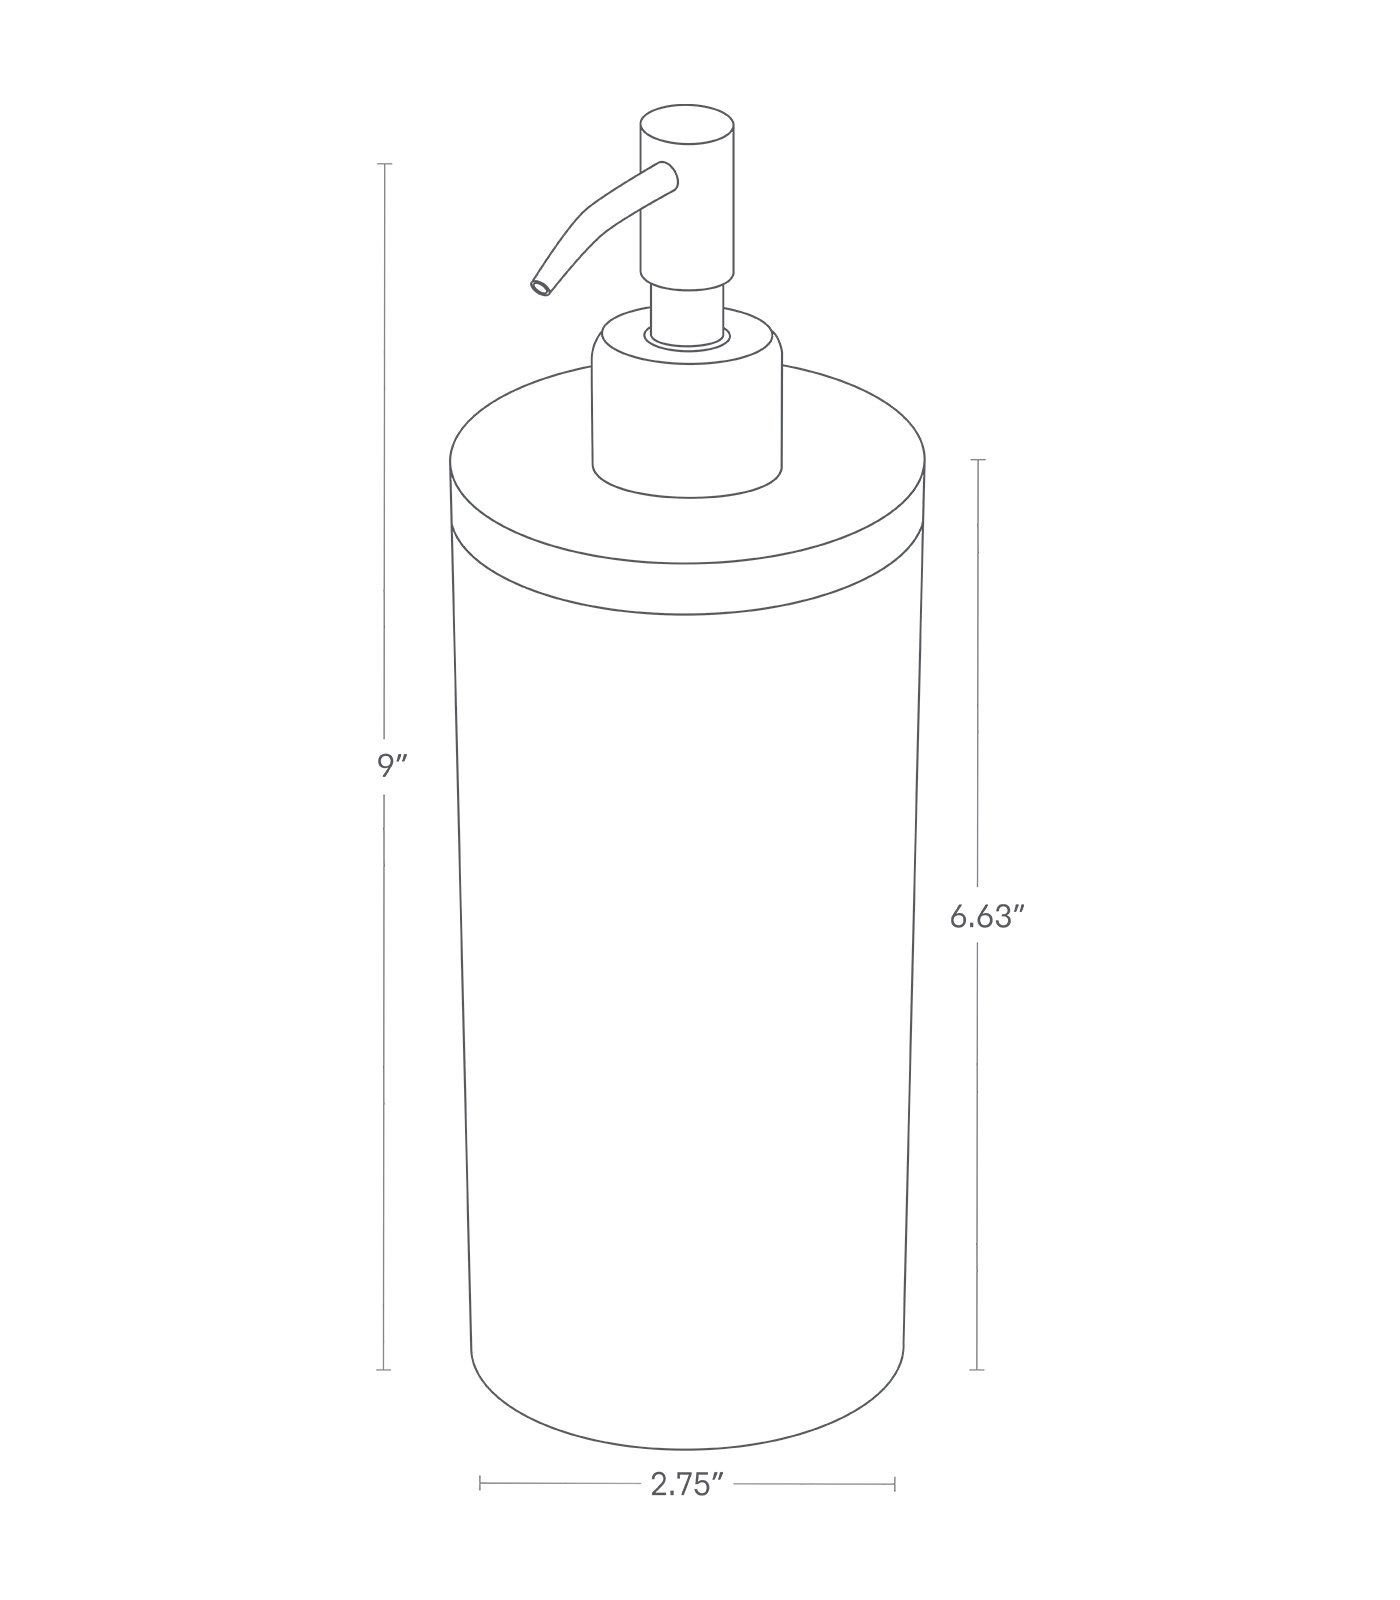 Dimension Image for Round Shower Dispenser on a white background showing height of 9